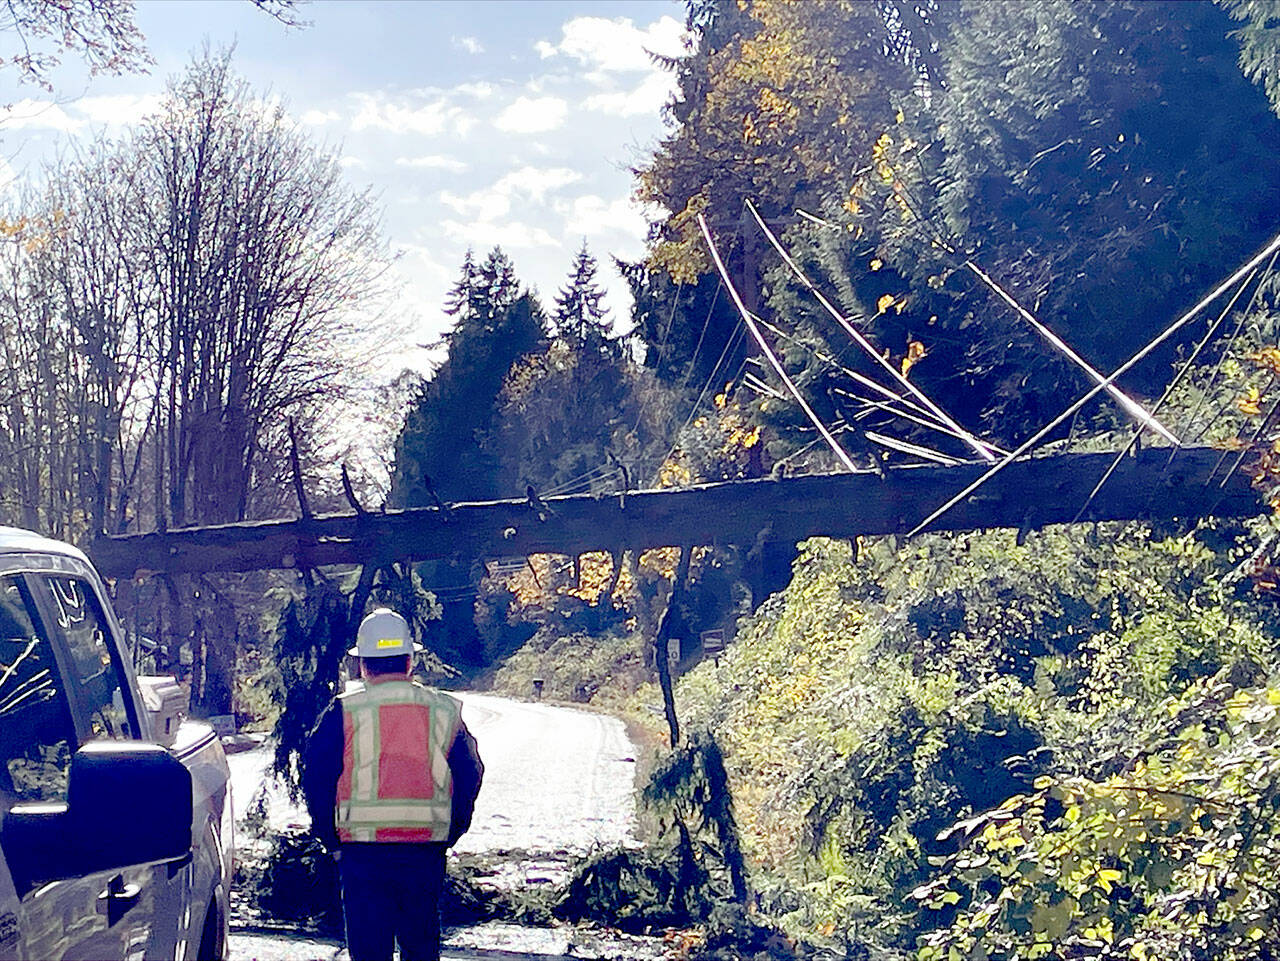 A 100-foot-tall Douglas fir that fell during the storm resulted in power outages for Jefferson County Public Utility District customers served by substations in Chimacum and Port Ludlow. (Will O’Donnell/Jefferson Public Utility District)